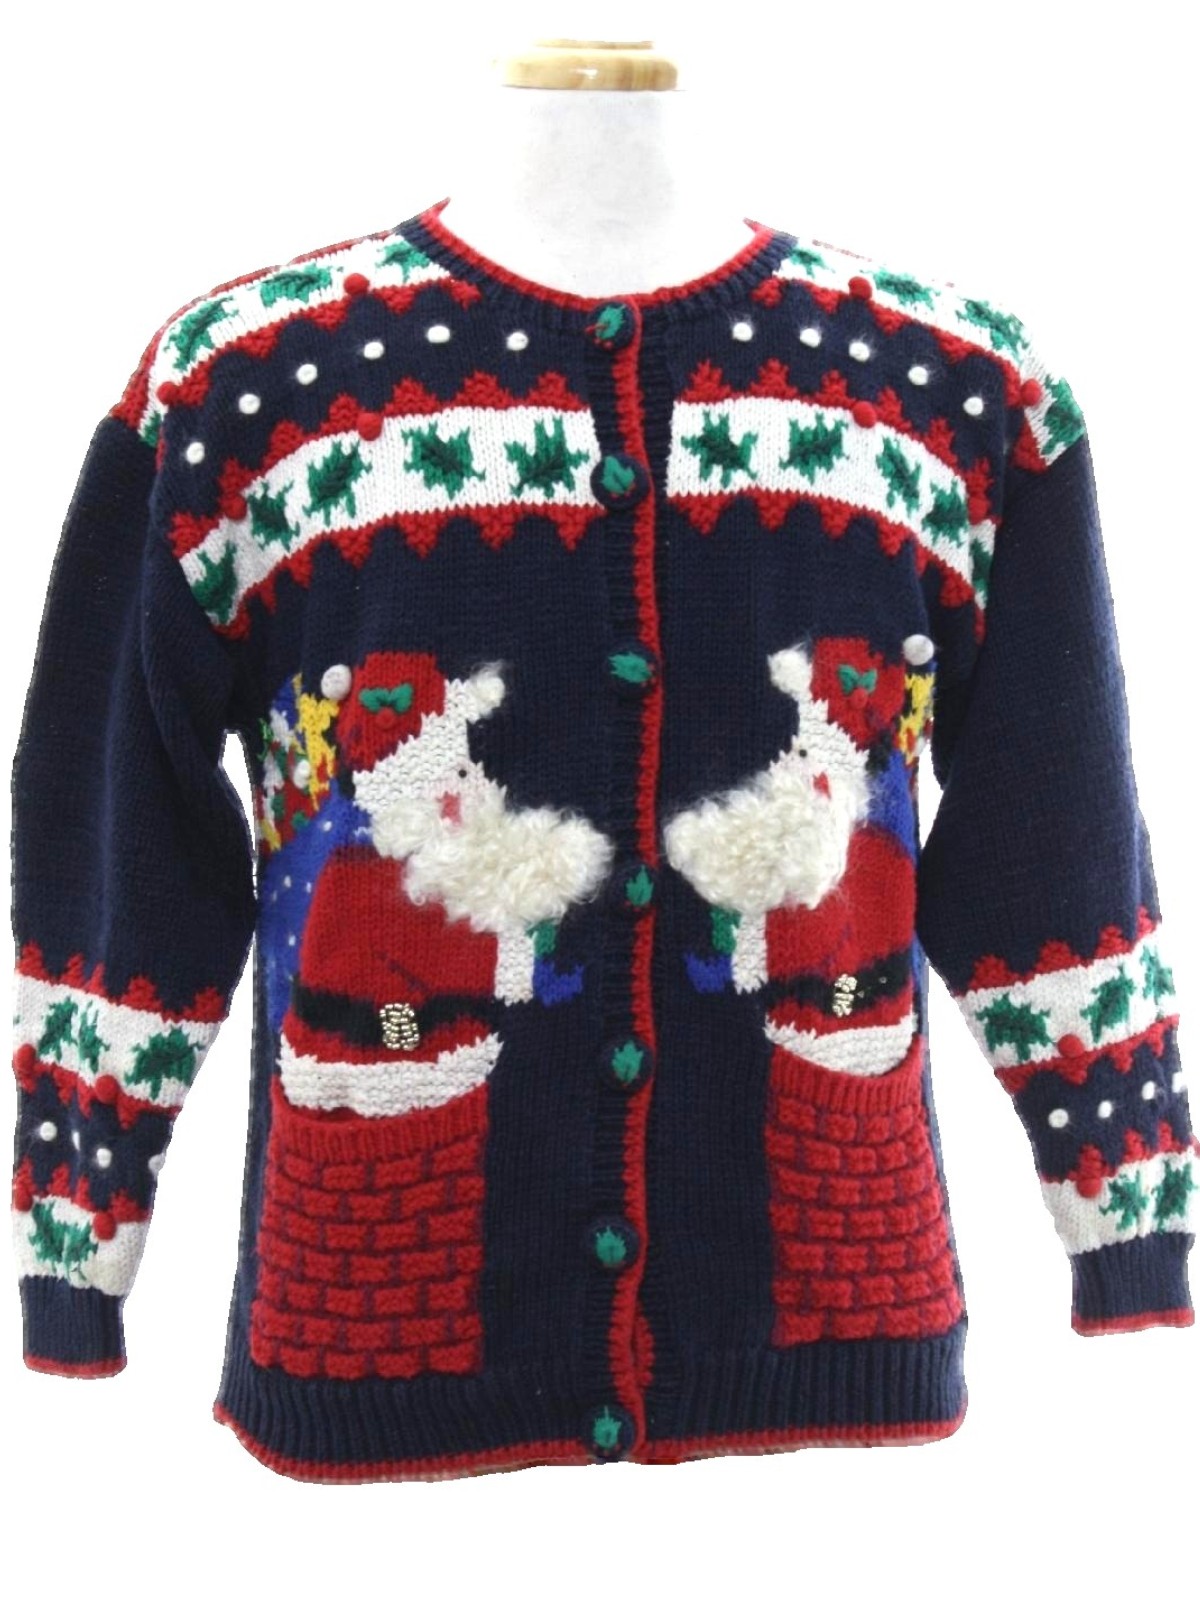 Womens Ugly Christmas Sweater: retro look -Belle Pointe- Womens ...